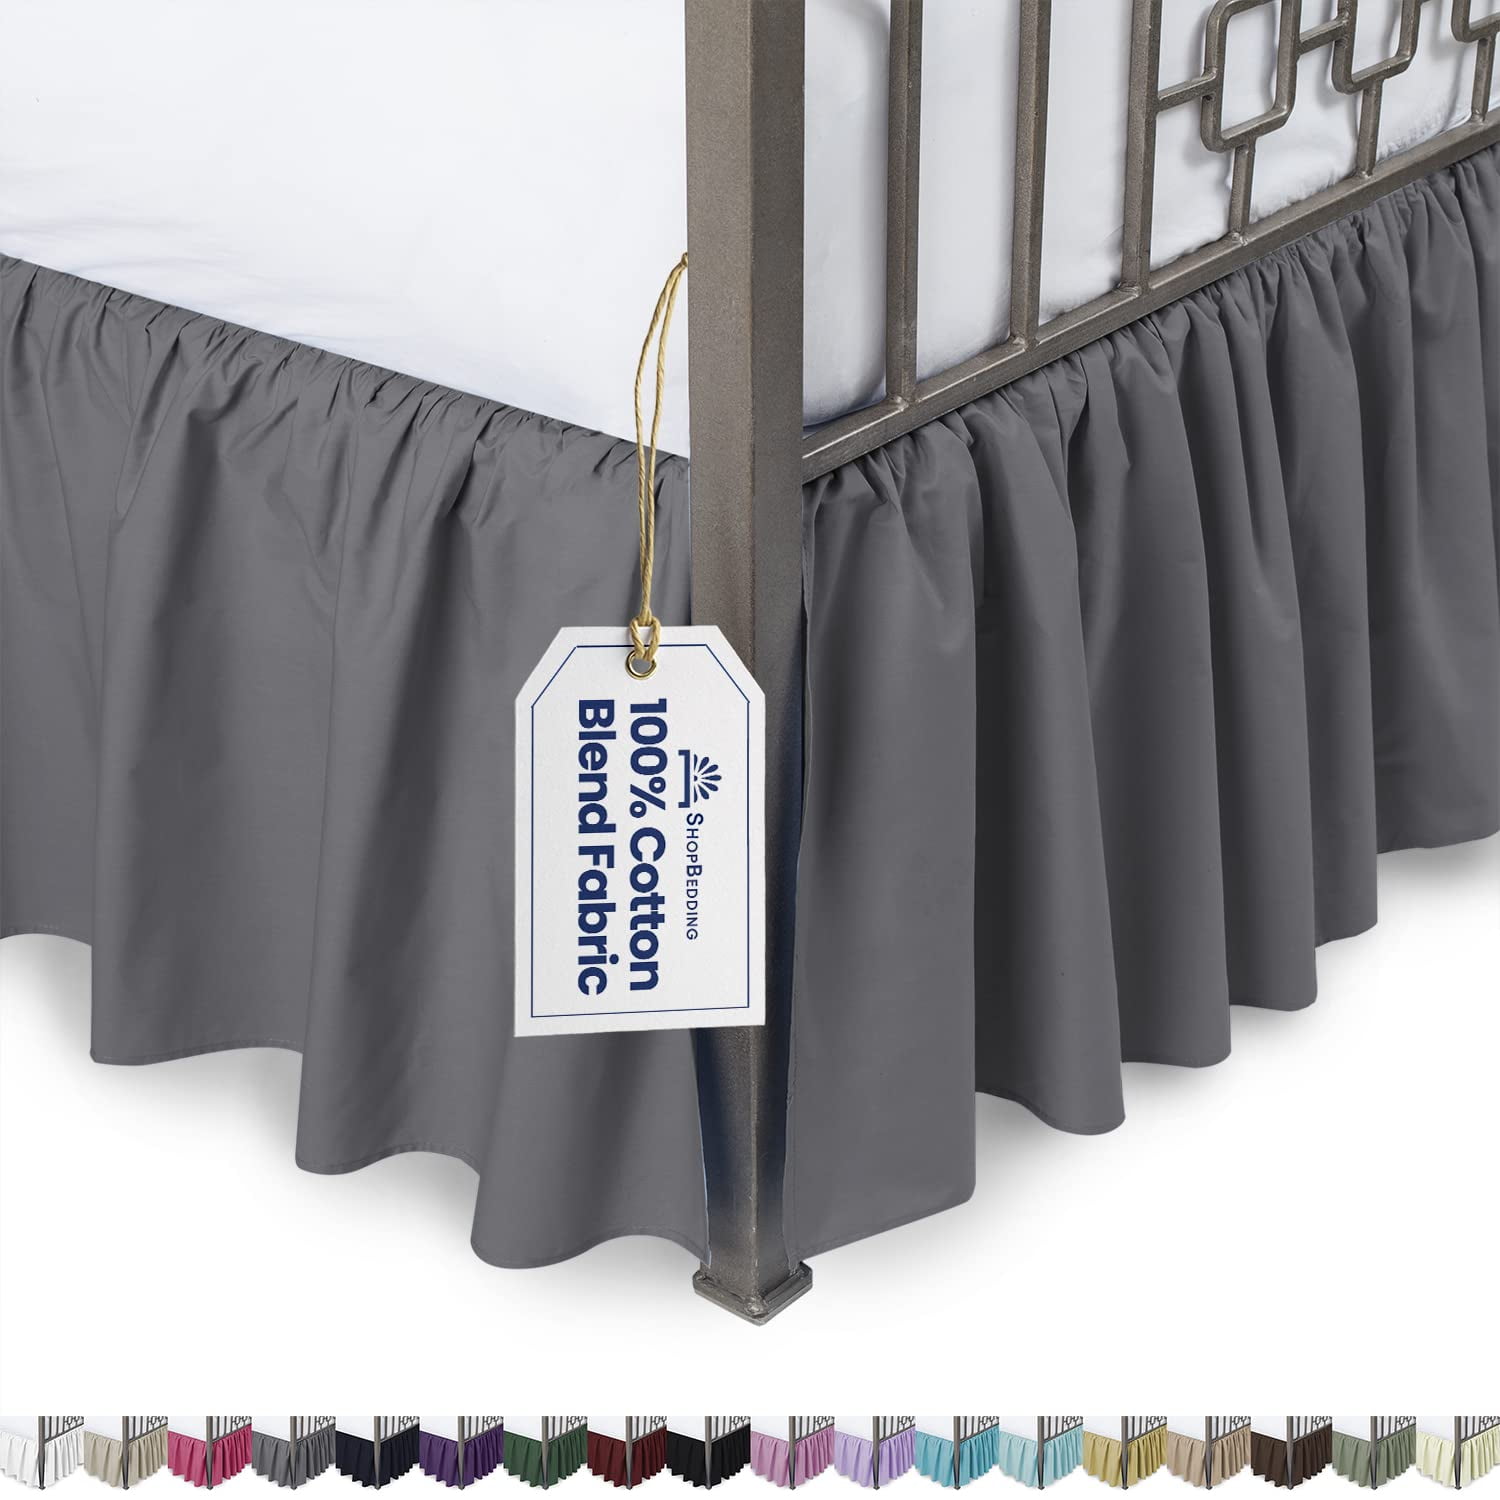 Ruffled Bed Skirt with Split Corners - Queen, Dove Grey, 21 Inch Drop  Cotton Blend Bedskirt (Available in 14 Colors) - Blissford Dust Ruffle -  Walmart.com